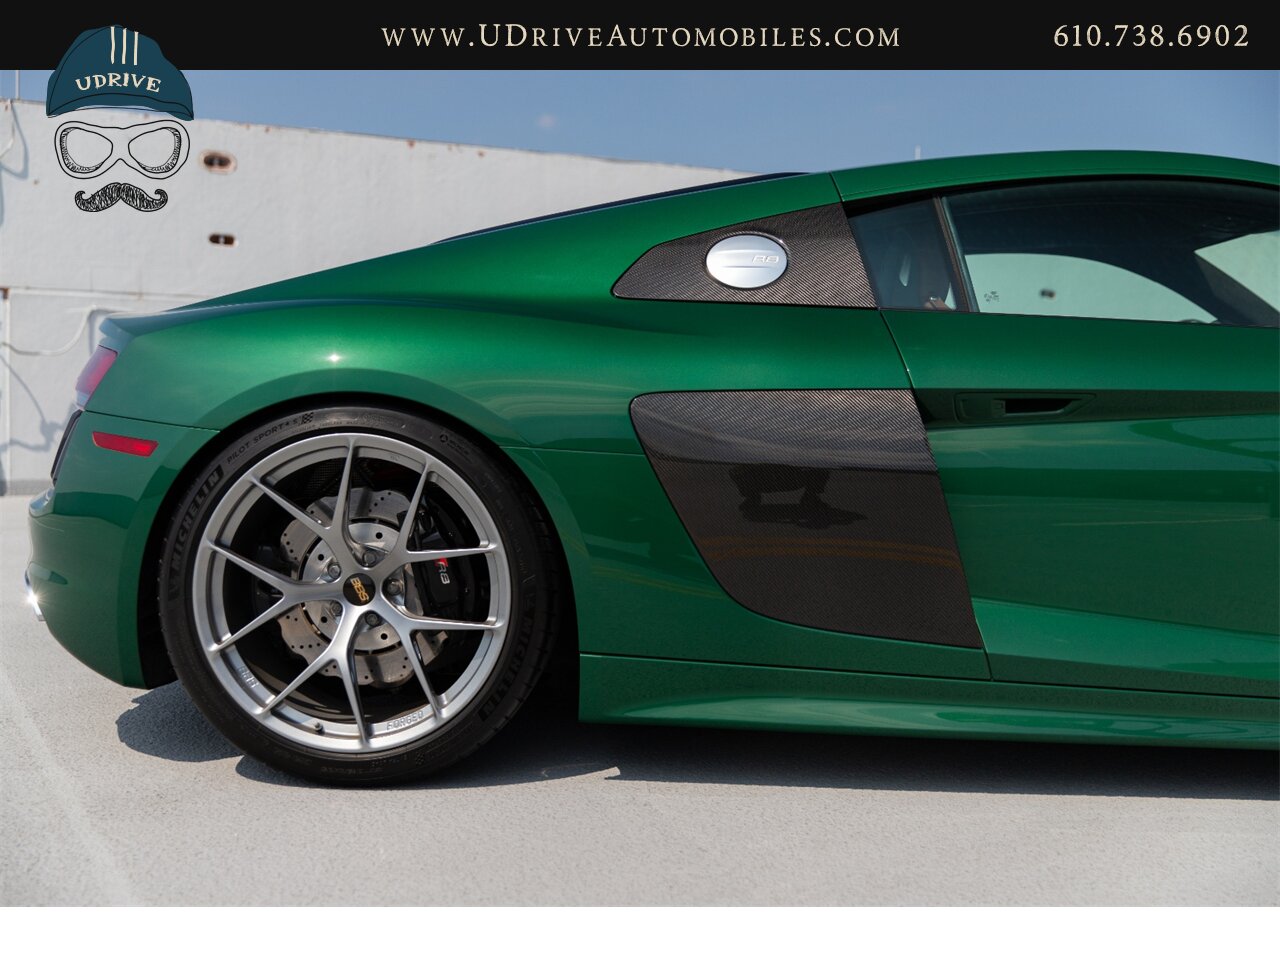 2017 Audi R8 Audi Exclusive Avocado Green Vermont Brown Leather  Diamond Stitching V10 Carbon Fiber - Photo 21 - West Chester, PA 19382